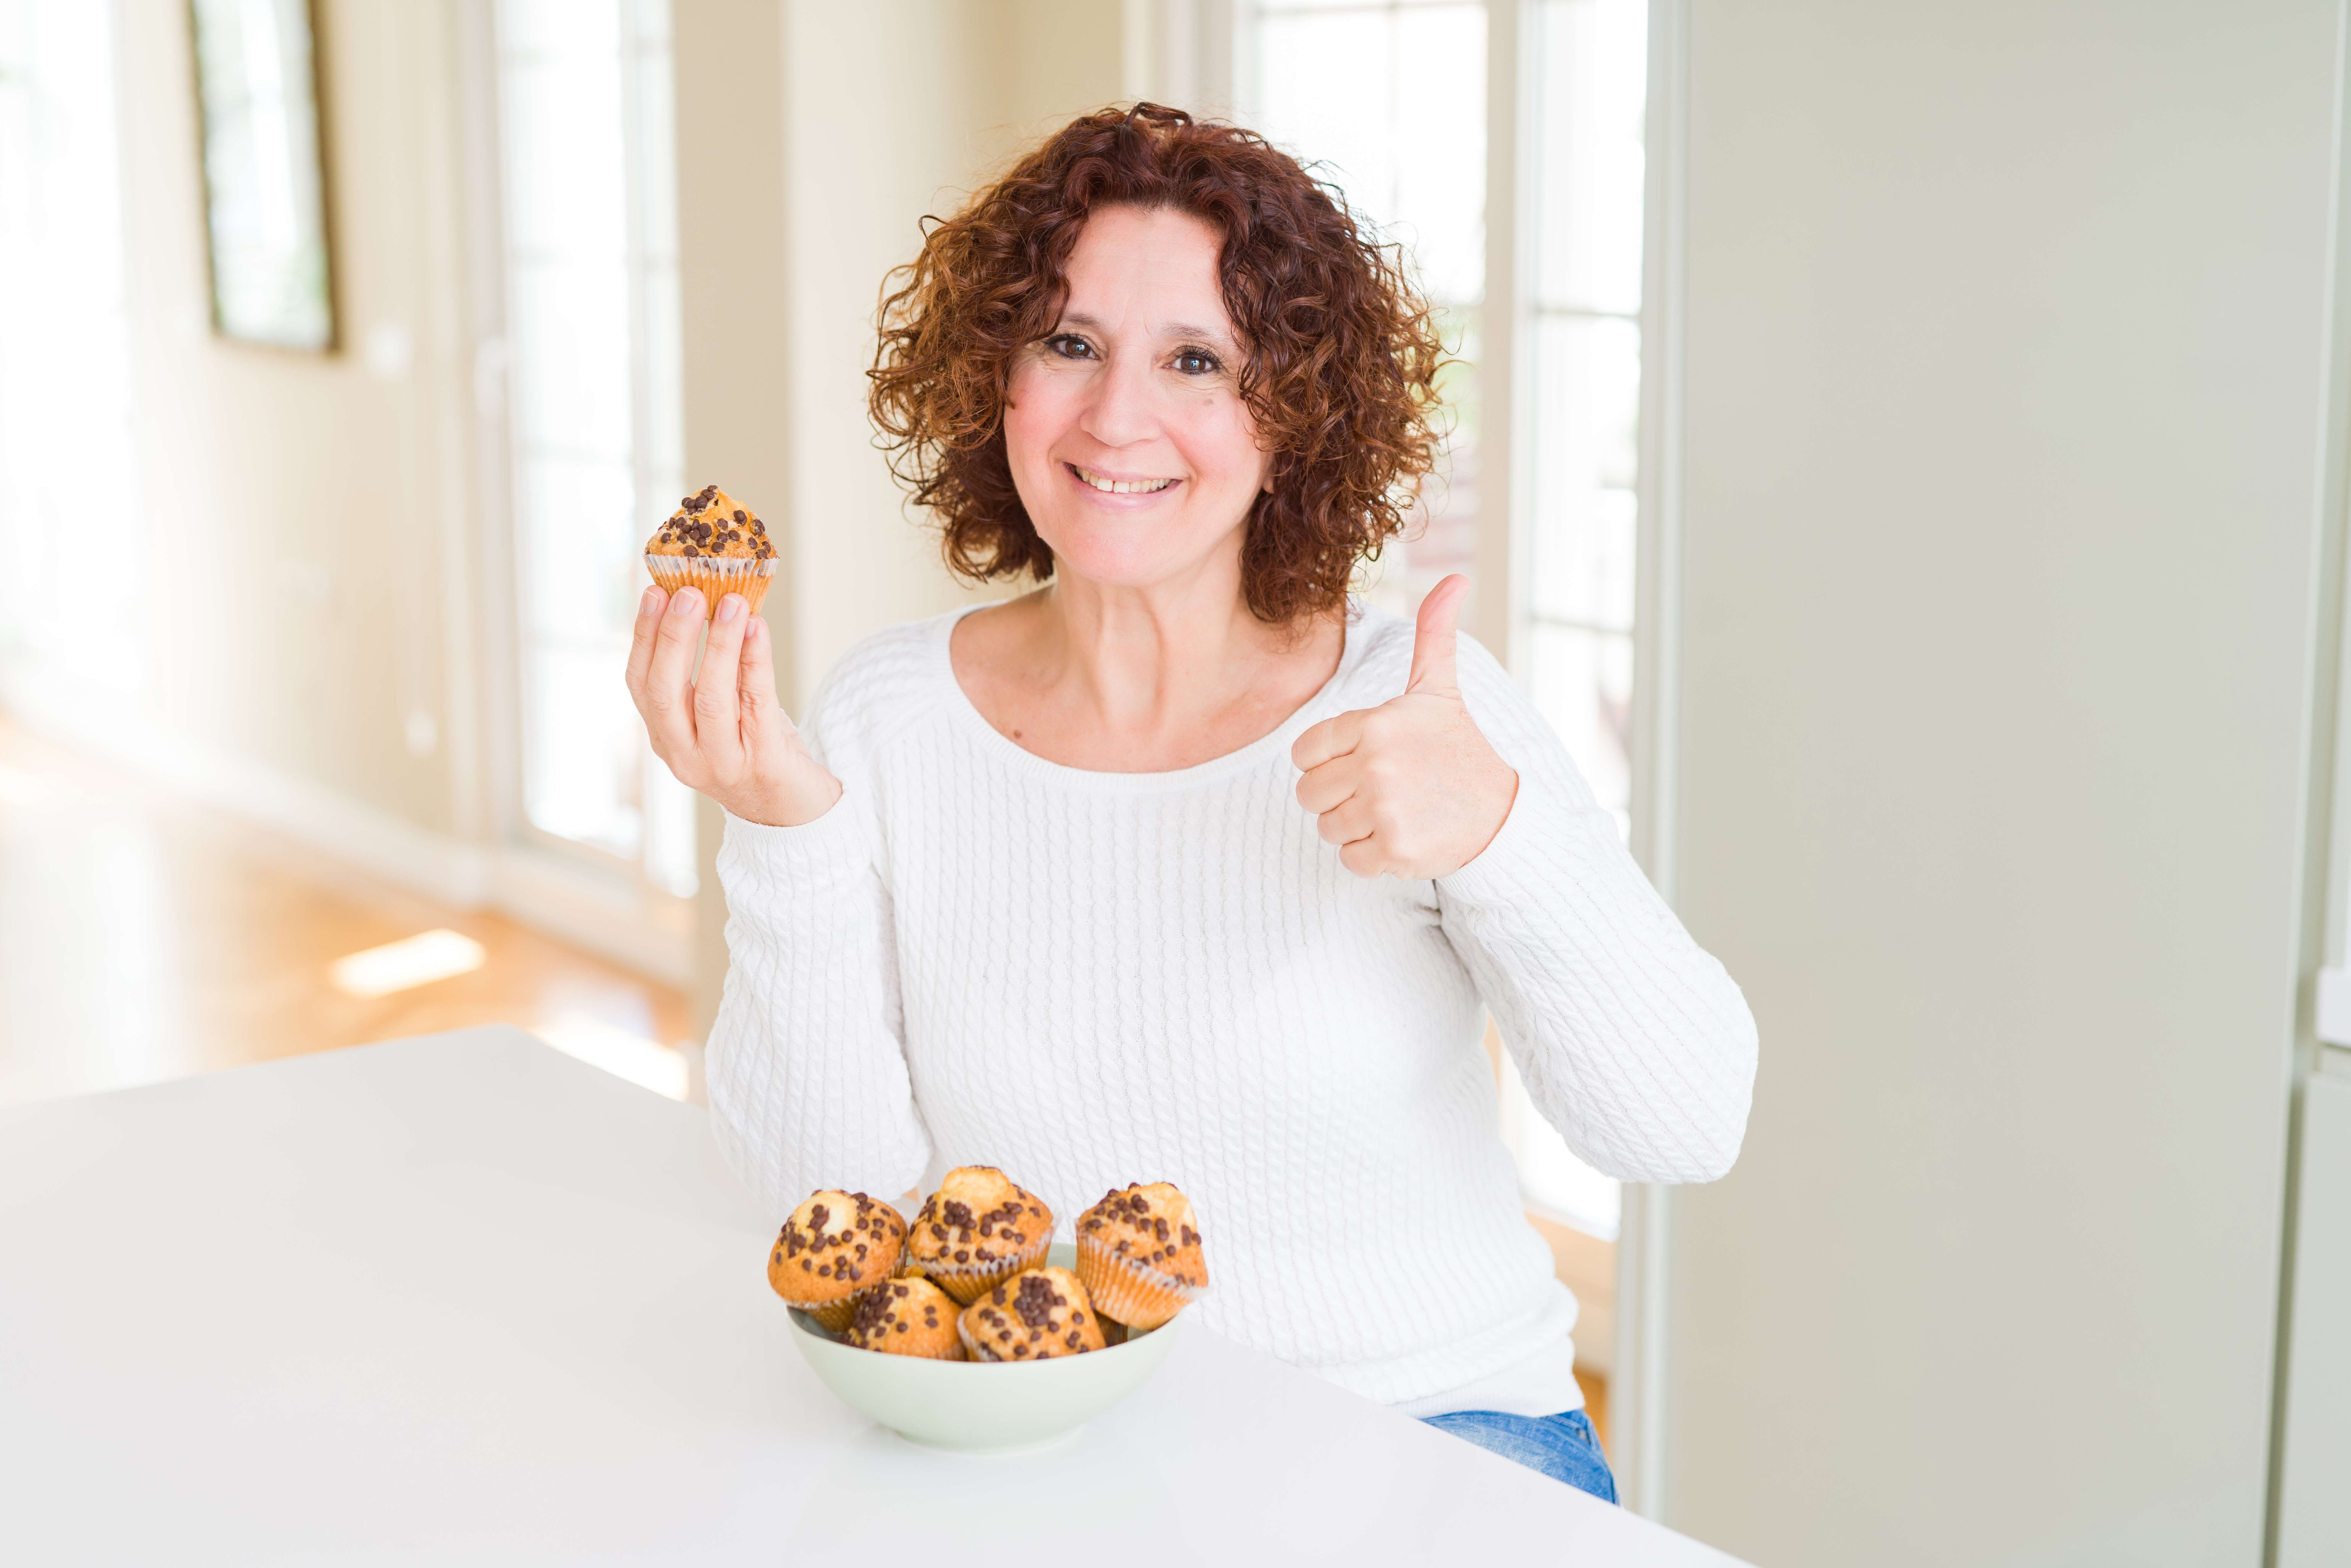 A woman enjoys the muffins she received as a gift from her coworkers.